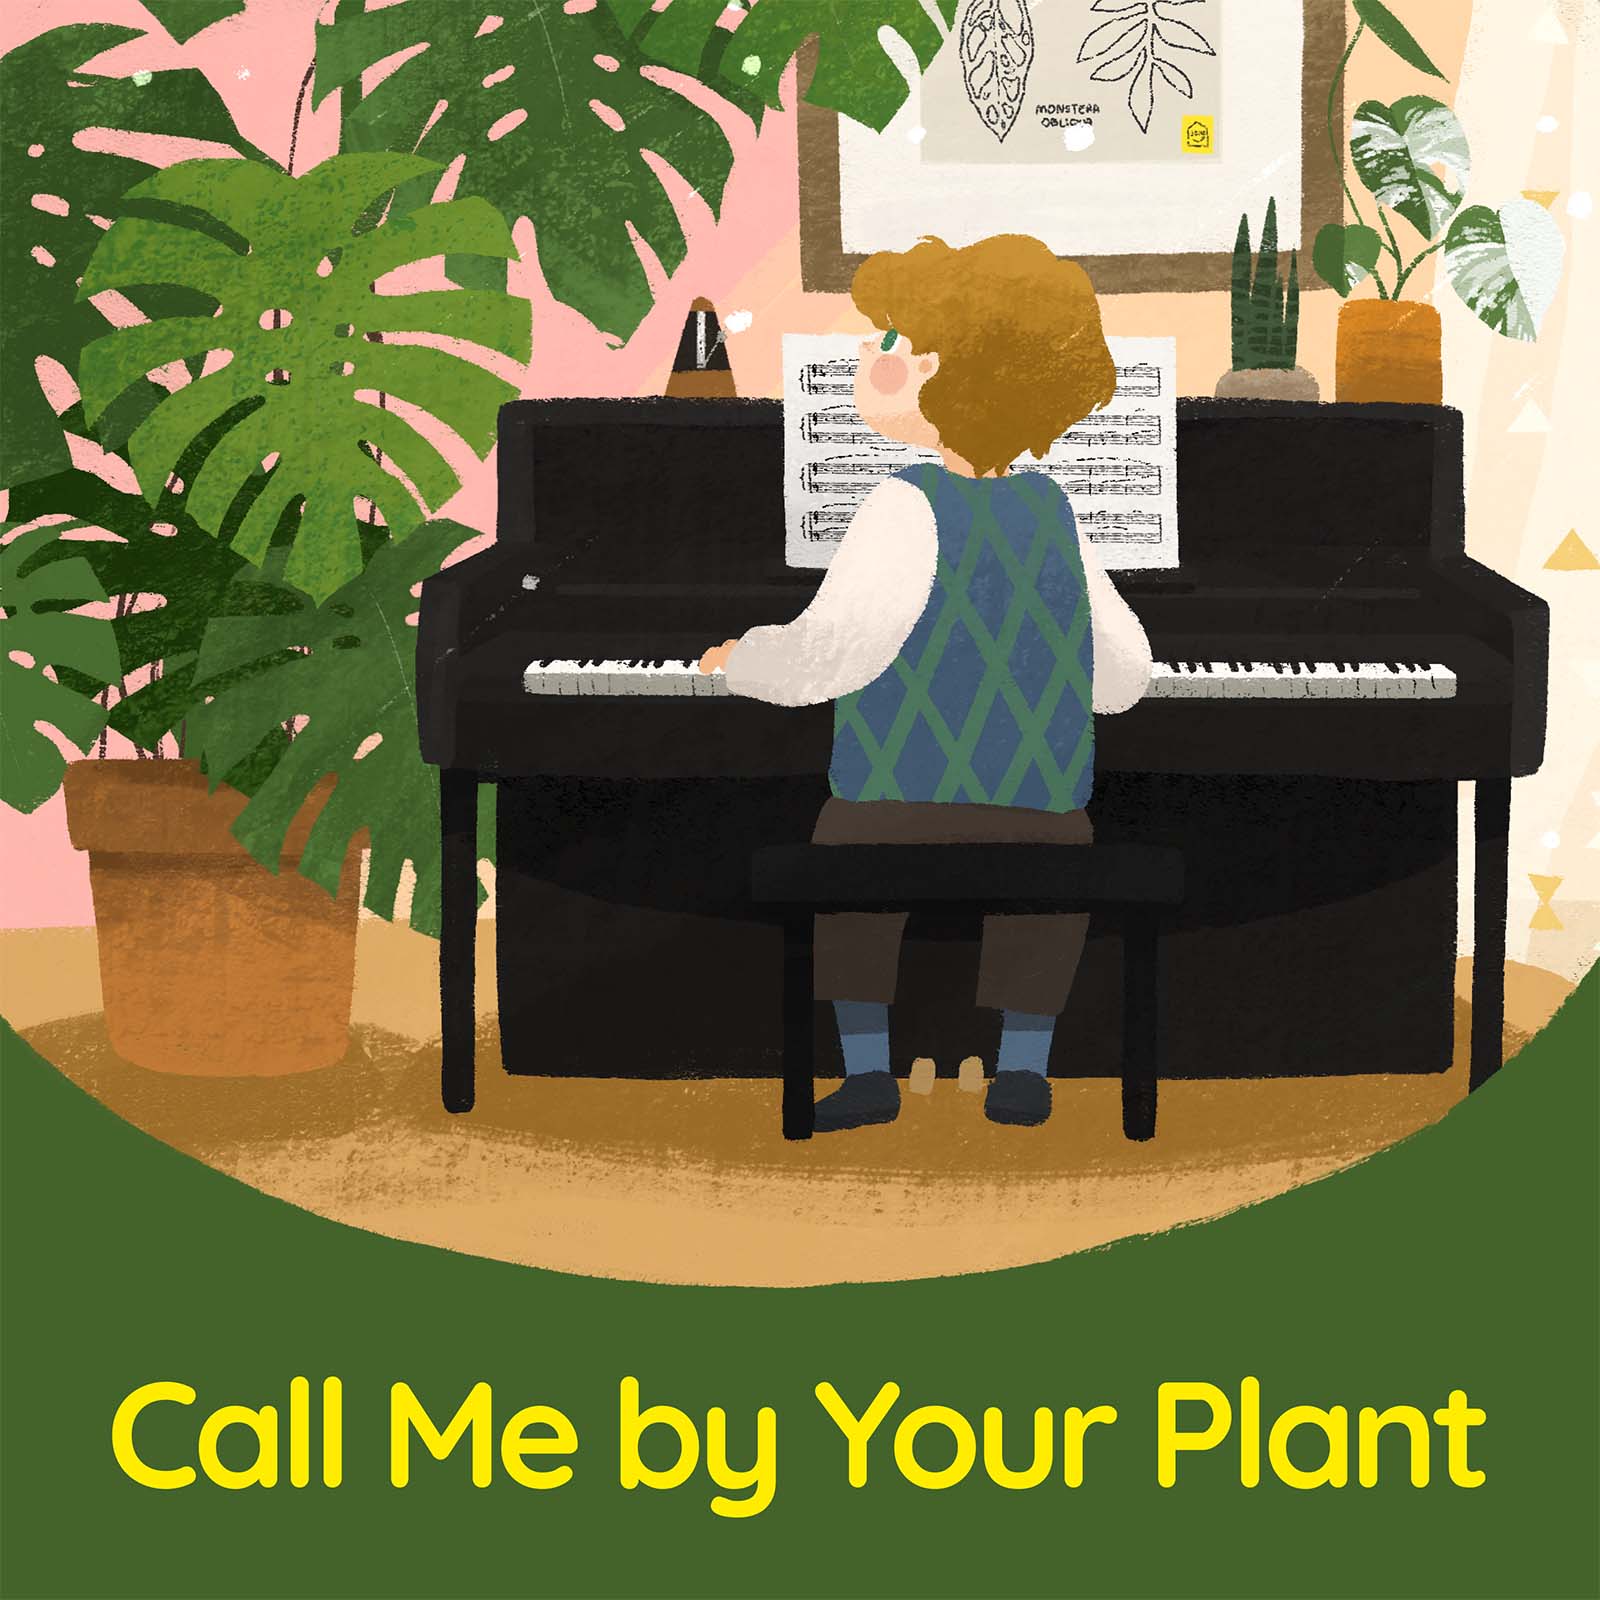 Welcome to Call Me by Your Plant, a podcast by JOMO Studio.